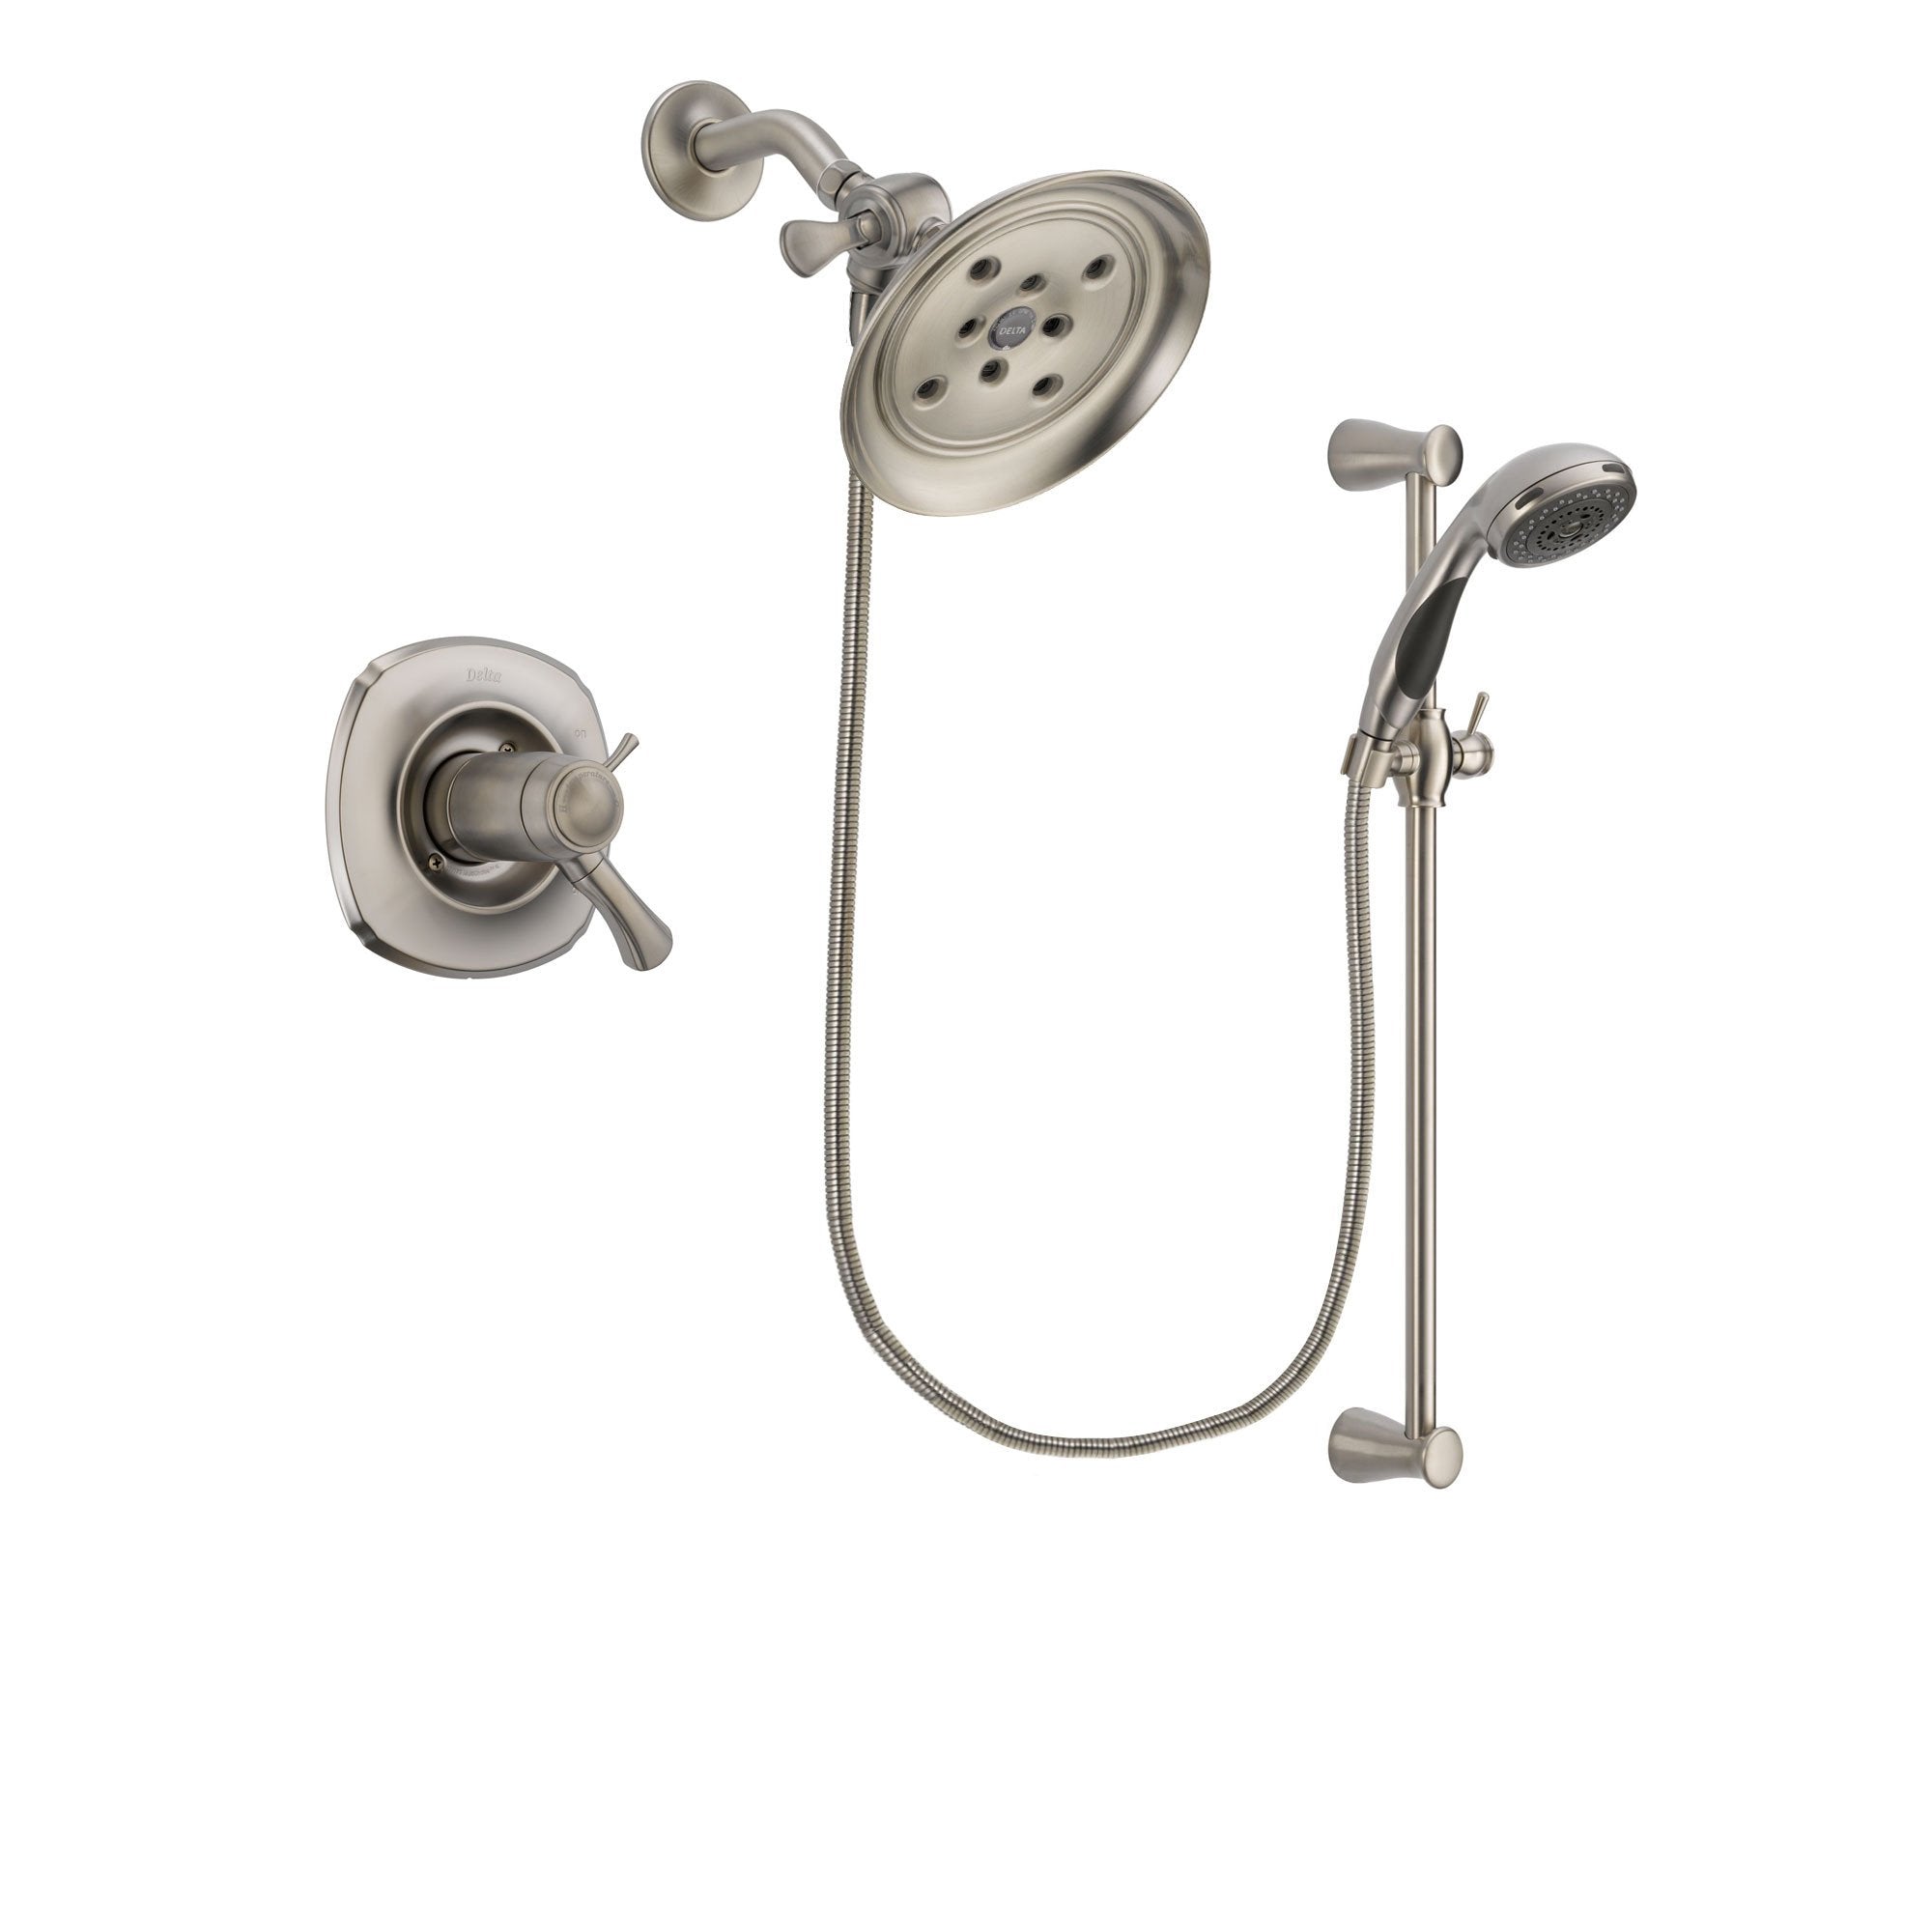 Delta Addison Stainless Steel Finish Thermostatic Shower Faucet System Package with Large Rain Showerhead and Handheld Shower Spray with Slide Bar Includes Rough-in Valve DSP1588V